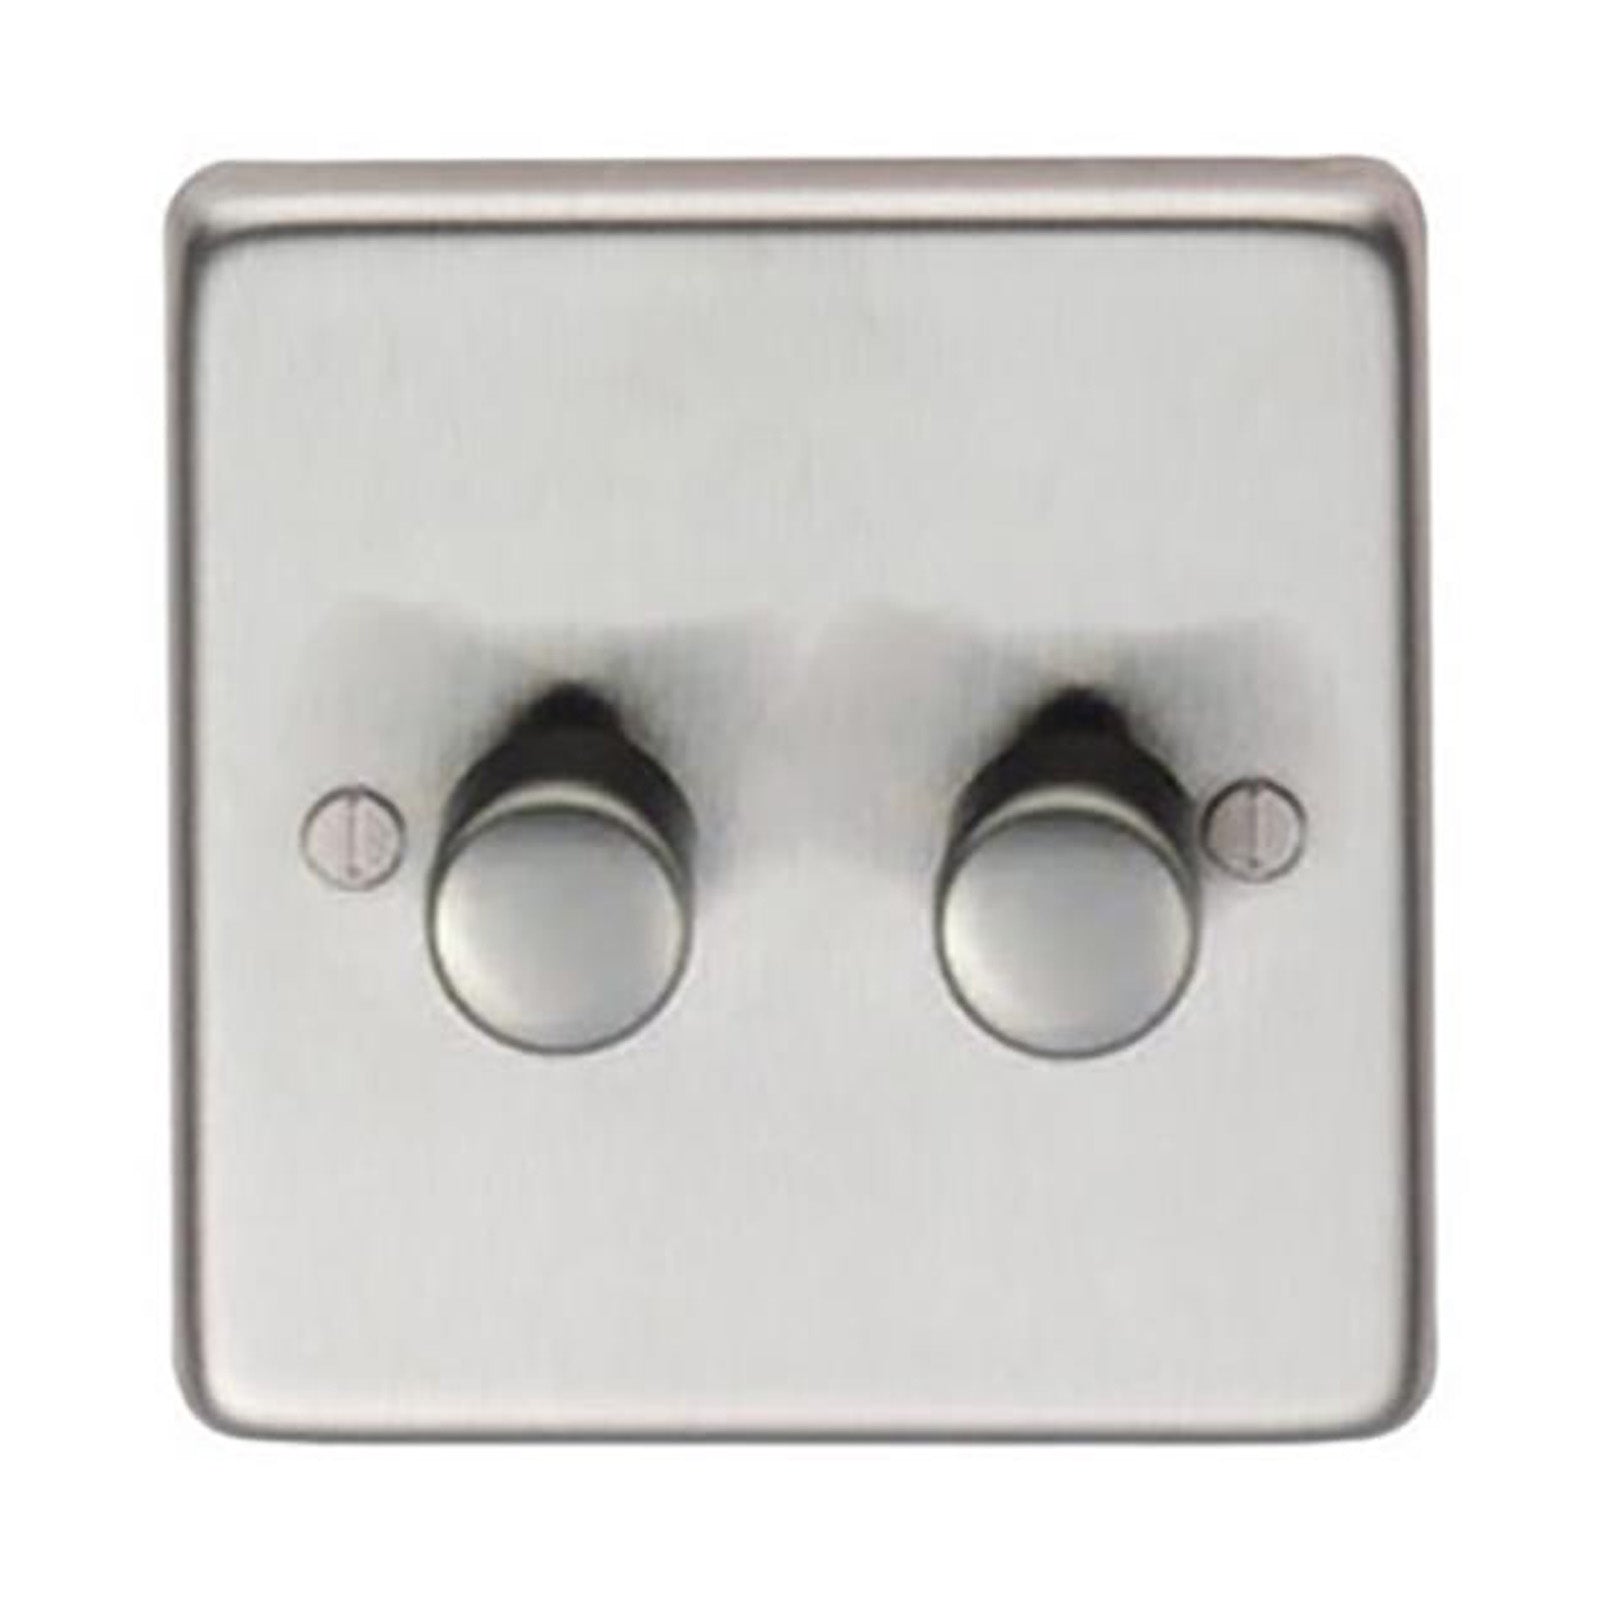 SHOW Image of Double LED Dimmer Switch with Satin Stainless Steel finish